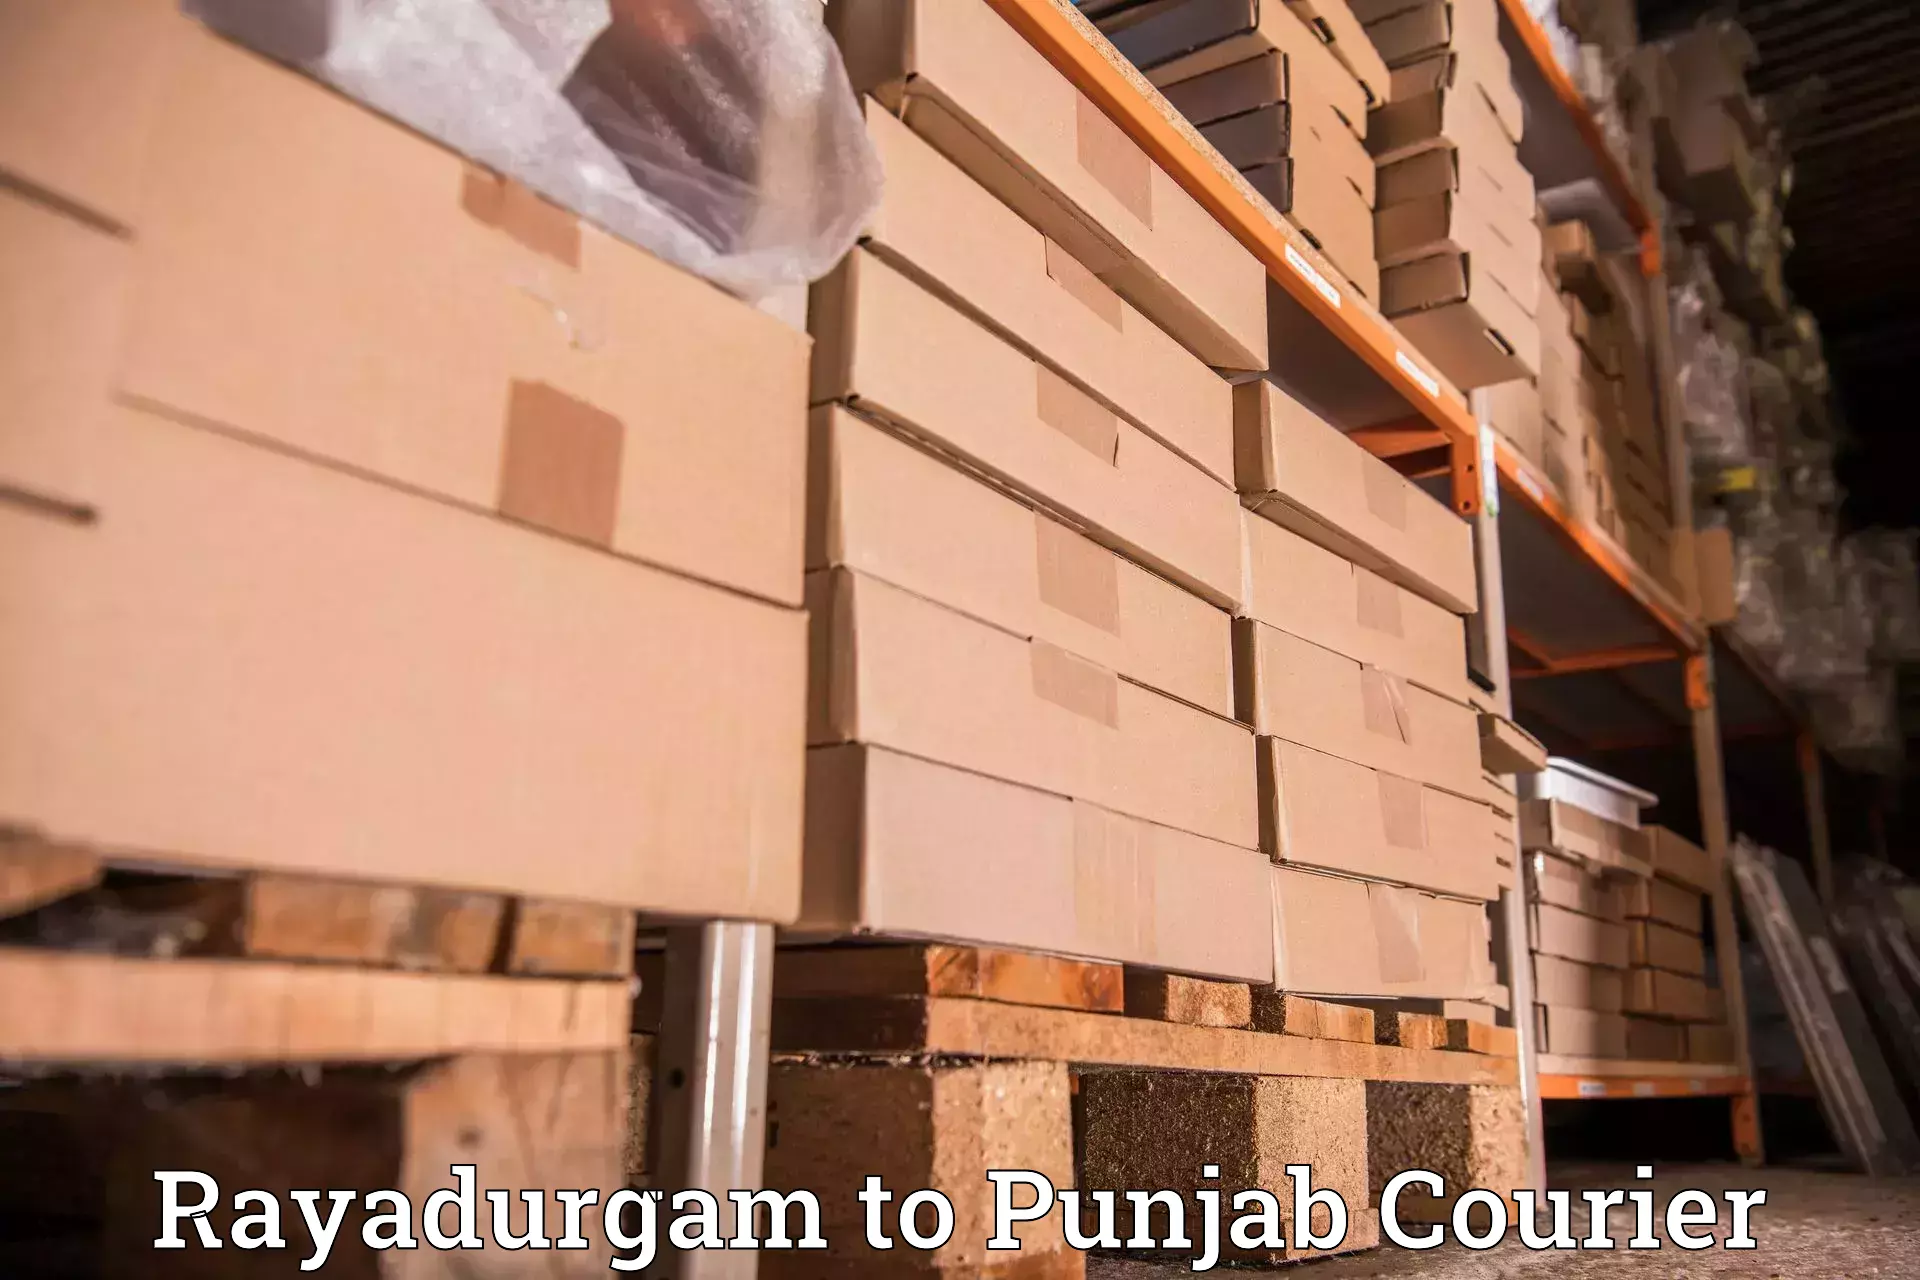 Ocean freight courier Rayadurgam to Malout